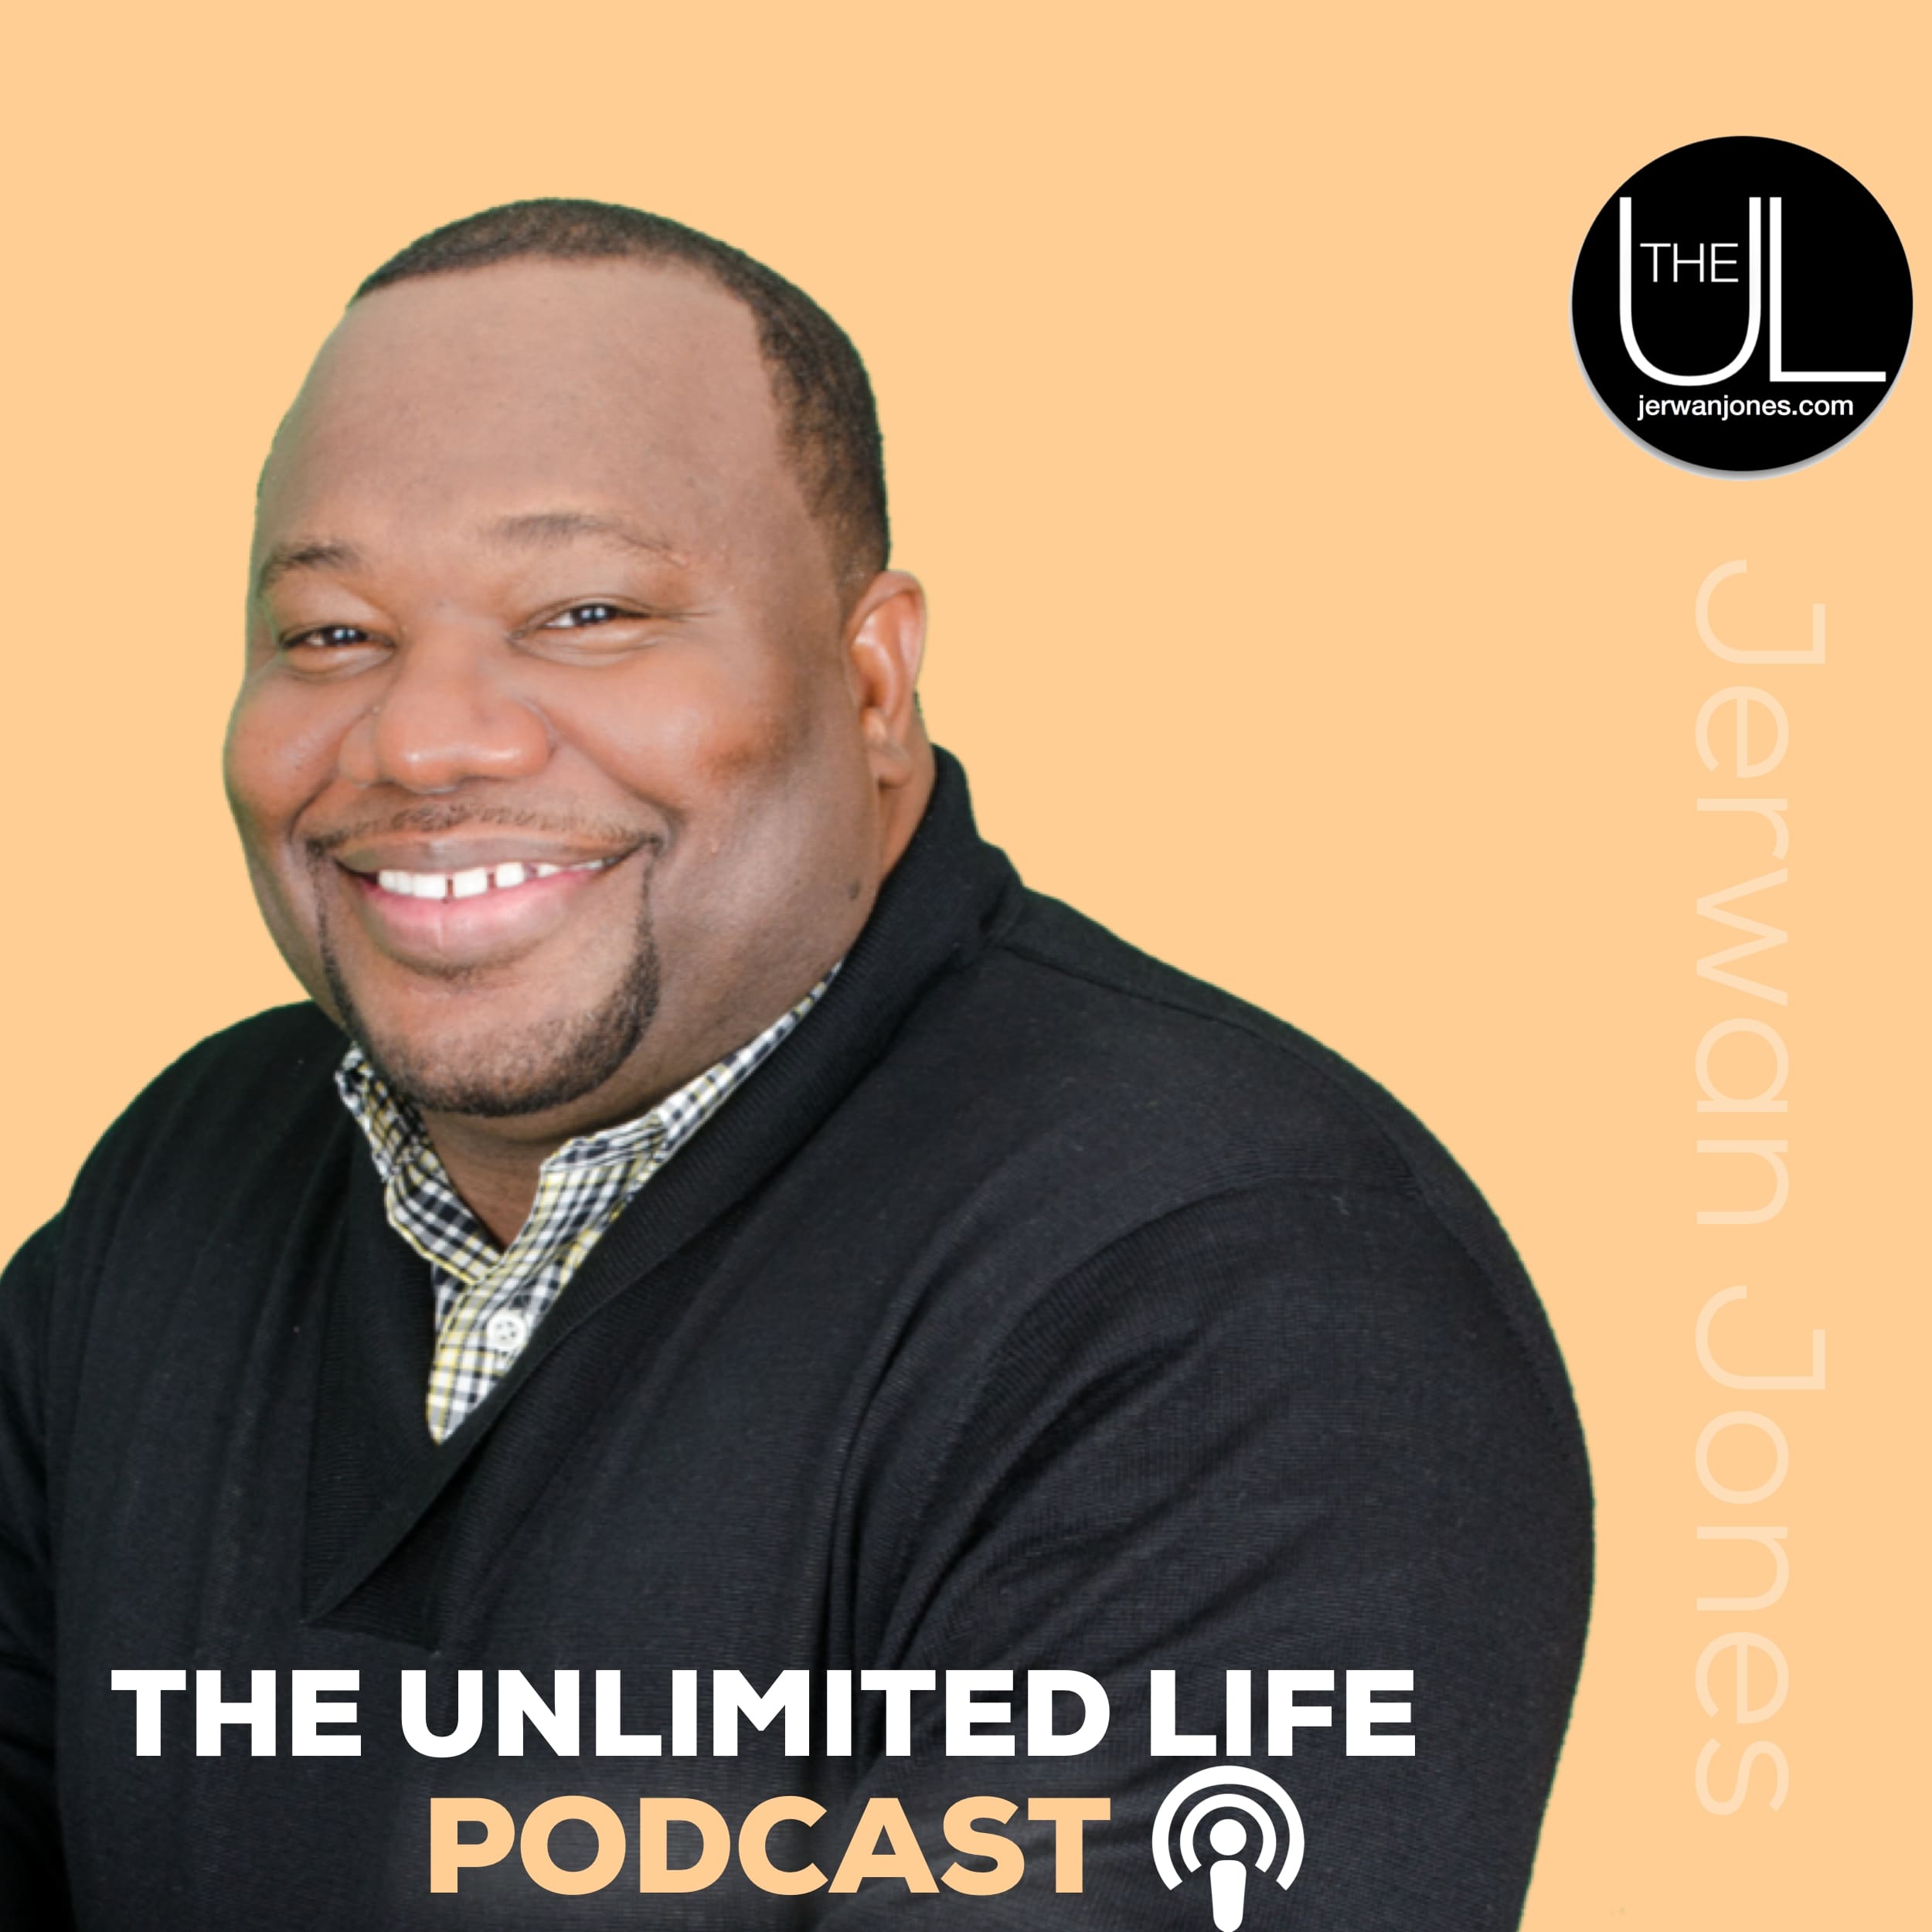 The Unlimited Life Podcast